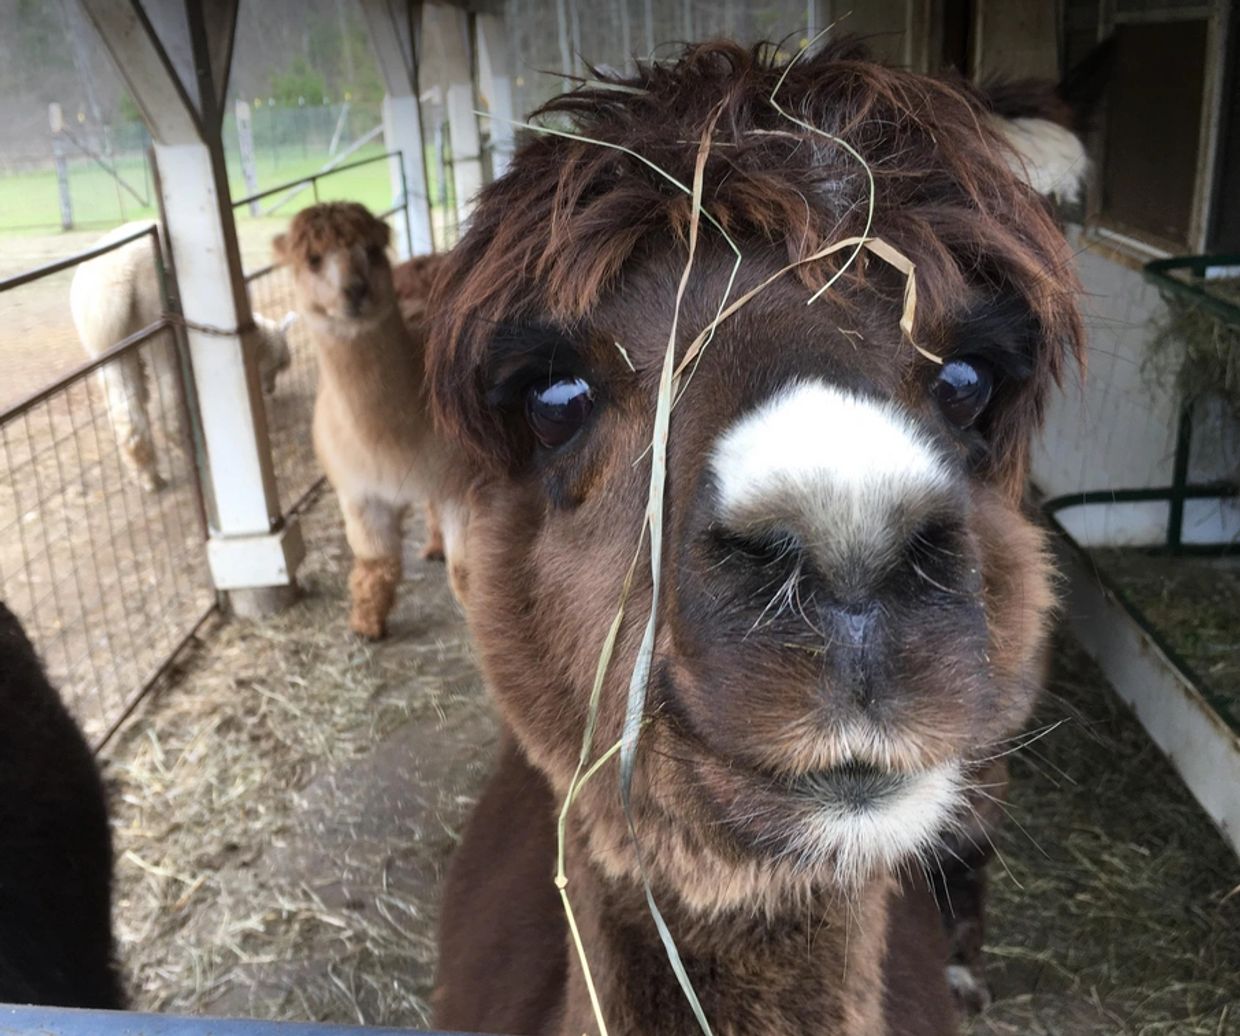 Close up of the face of an adorable alpaca with big, dark eyes and a white nose and appears to be sm